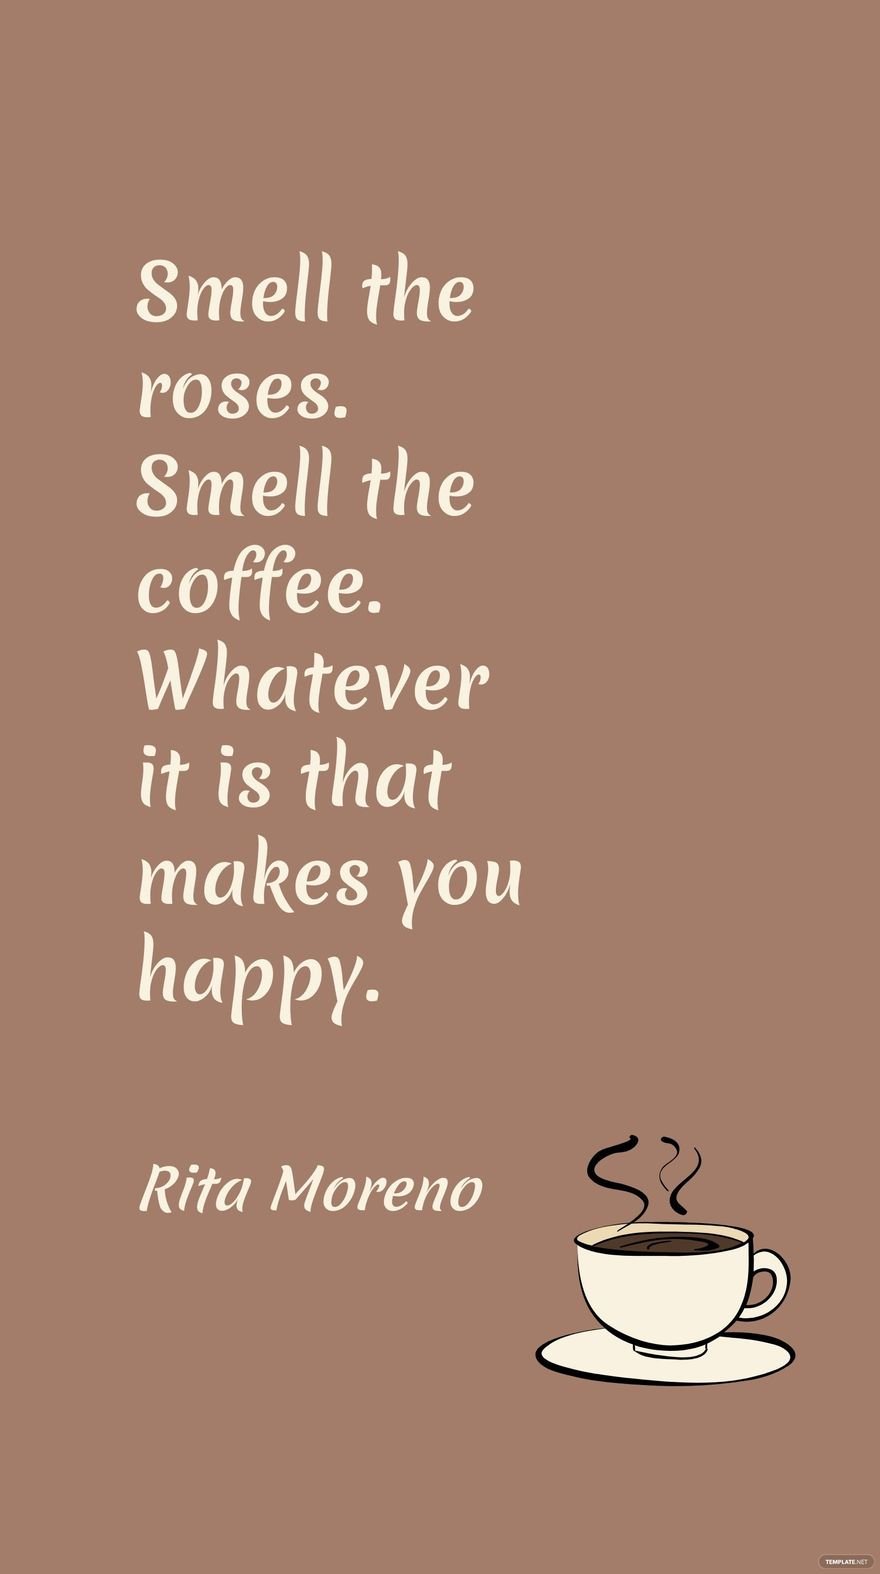 Free Rita Moreno - Smell the roses. Smell the coffee. Whatever it is that makes you happy.